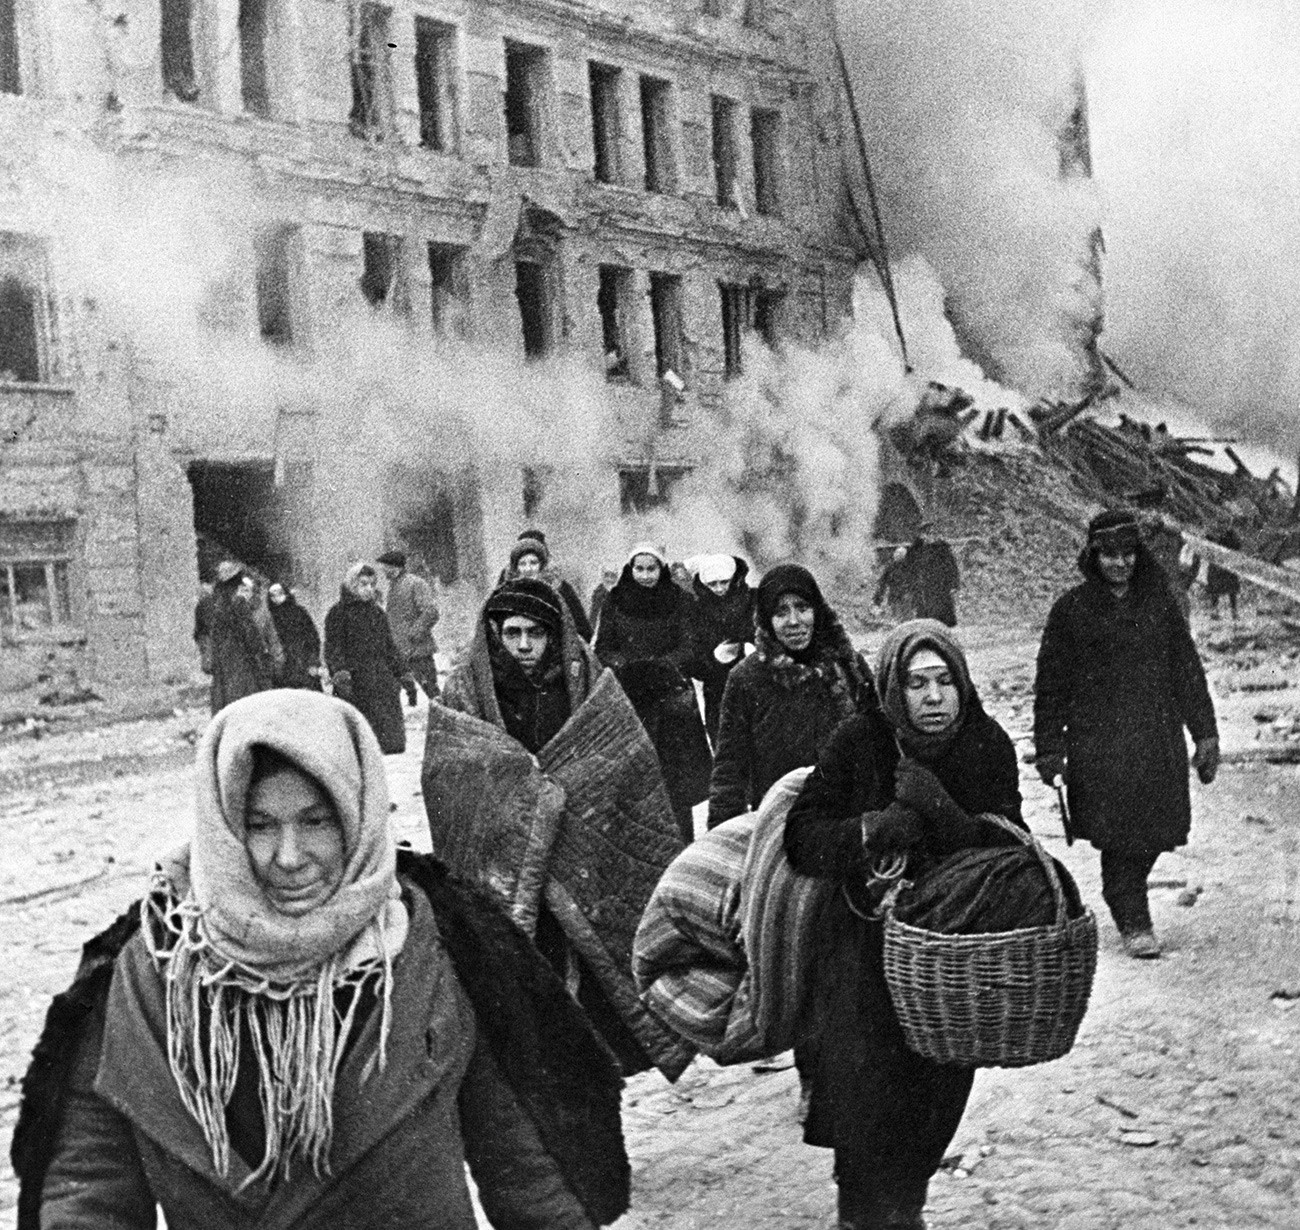 Citizens of Leningrad during the siege of the city.